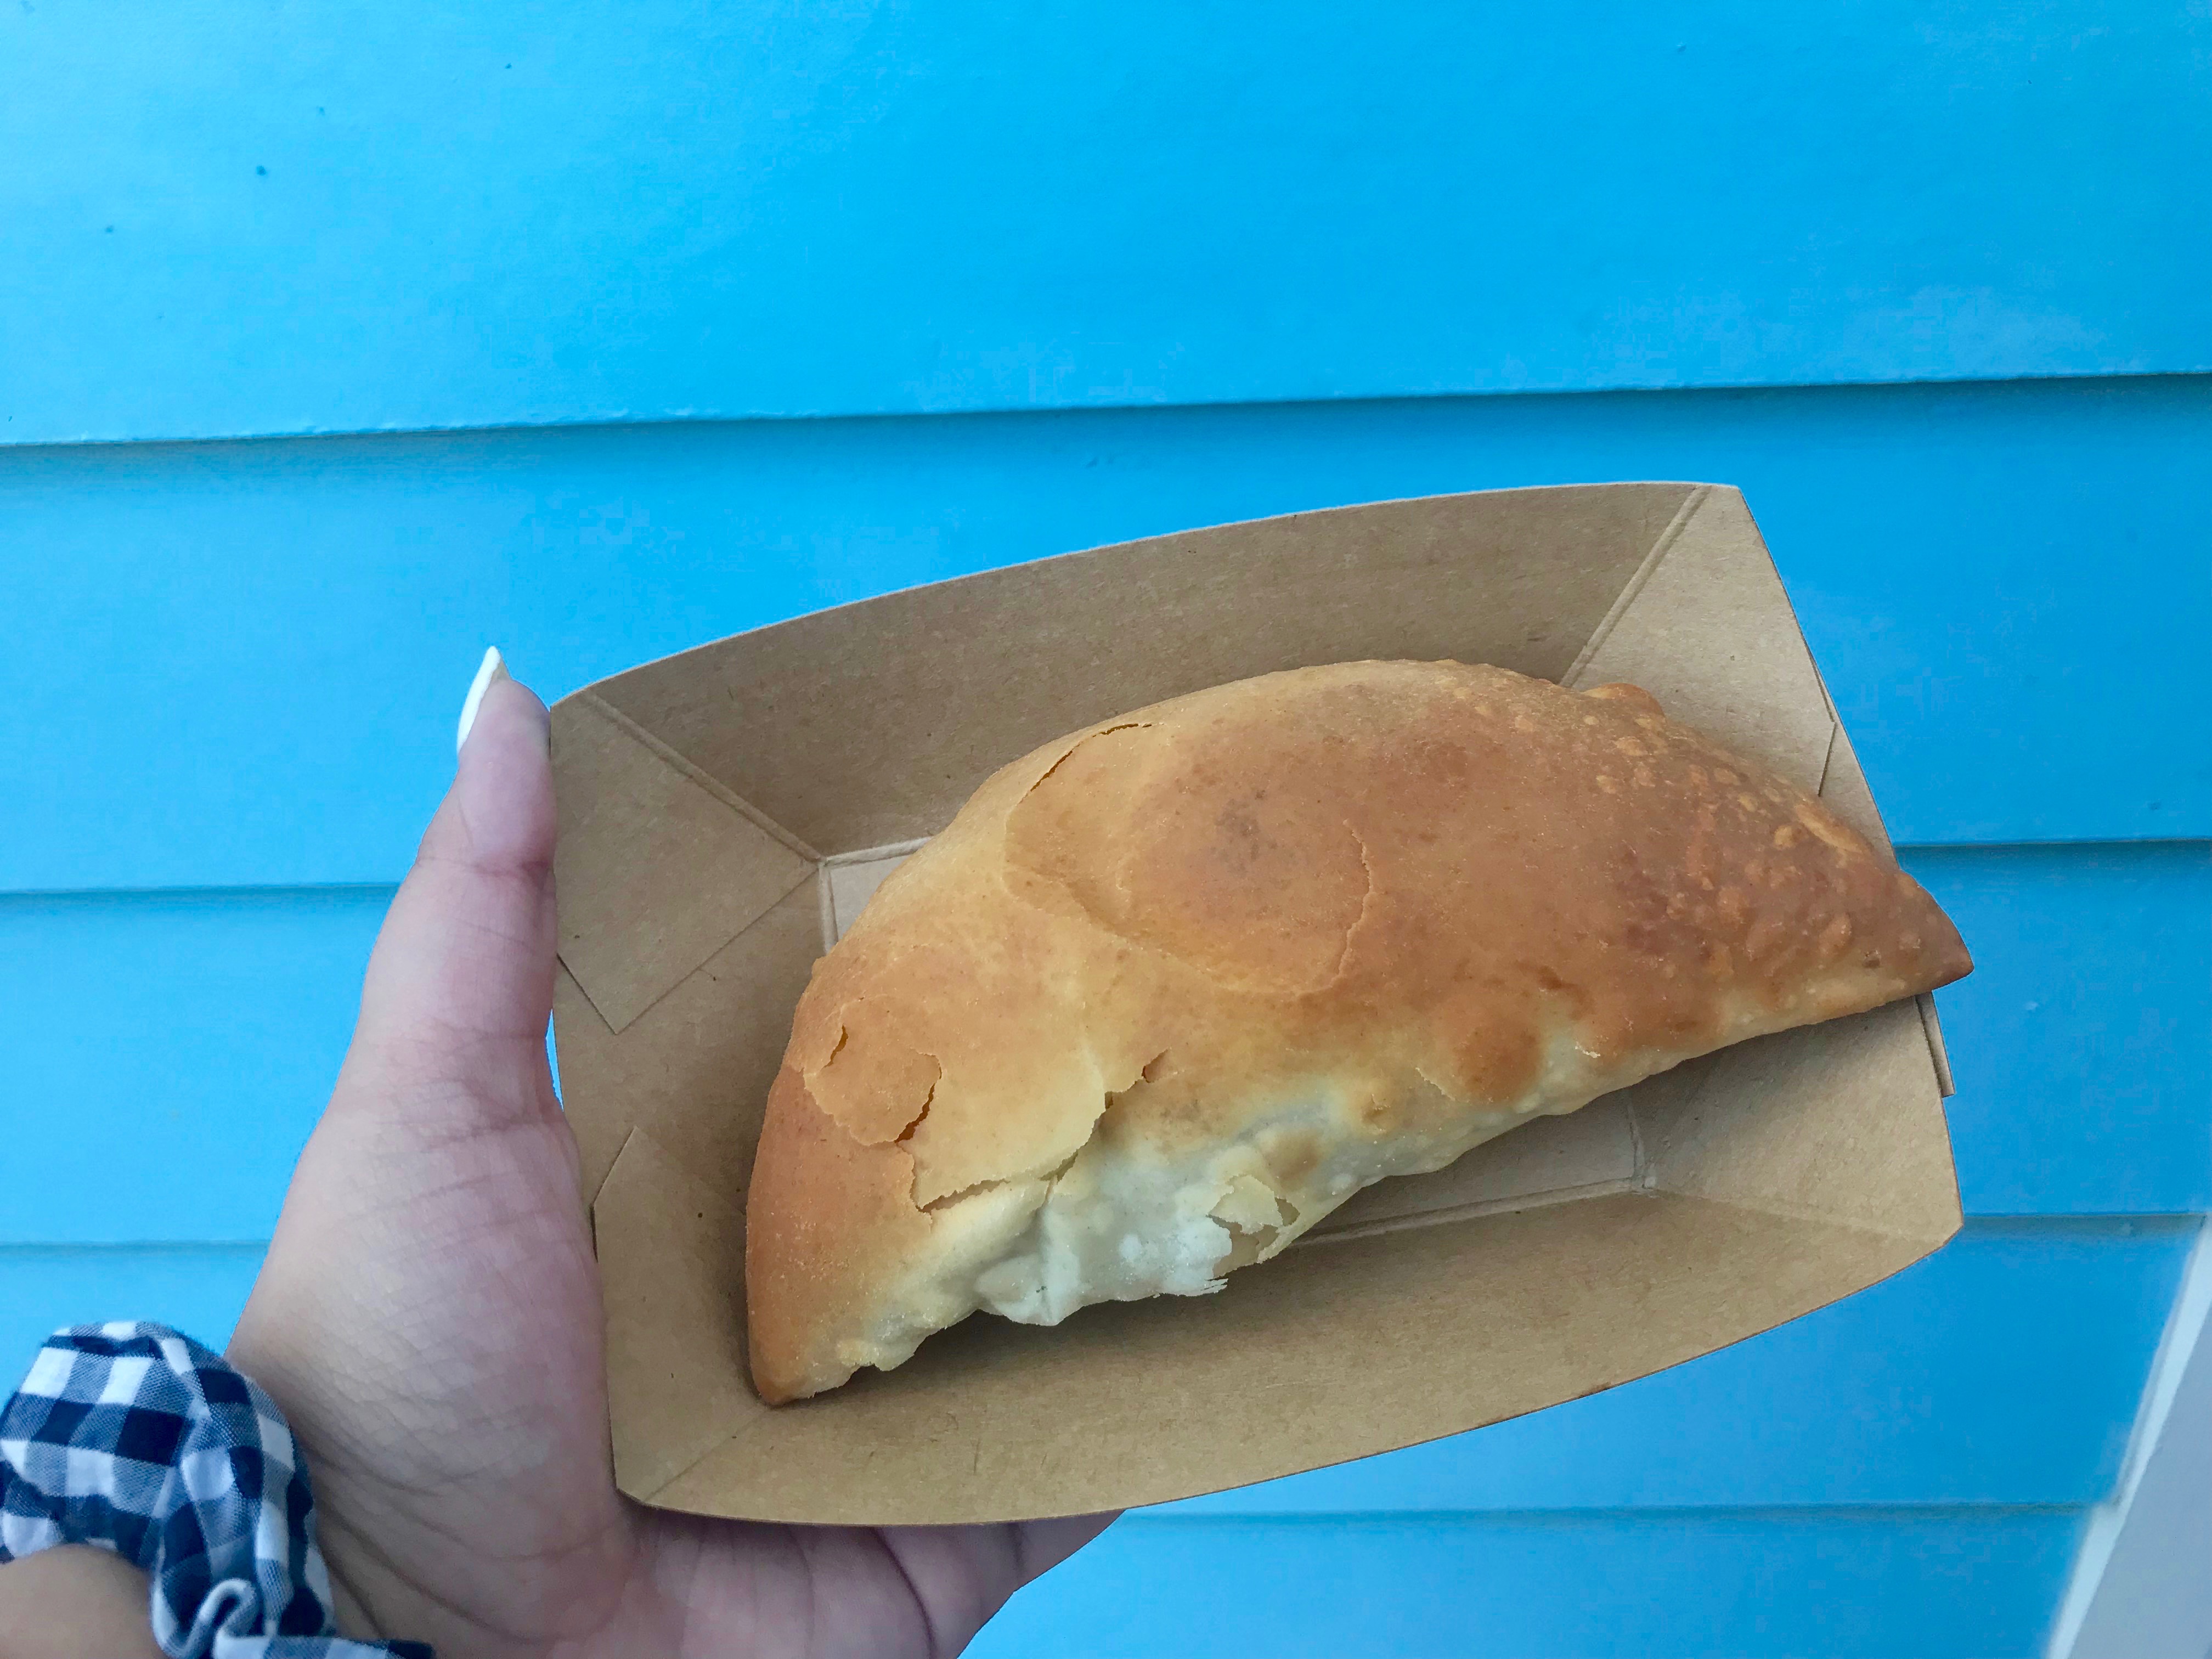 Top 5 Favorite Foods at EPCOT’s International Food and Wine Festival